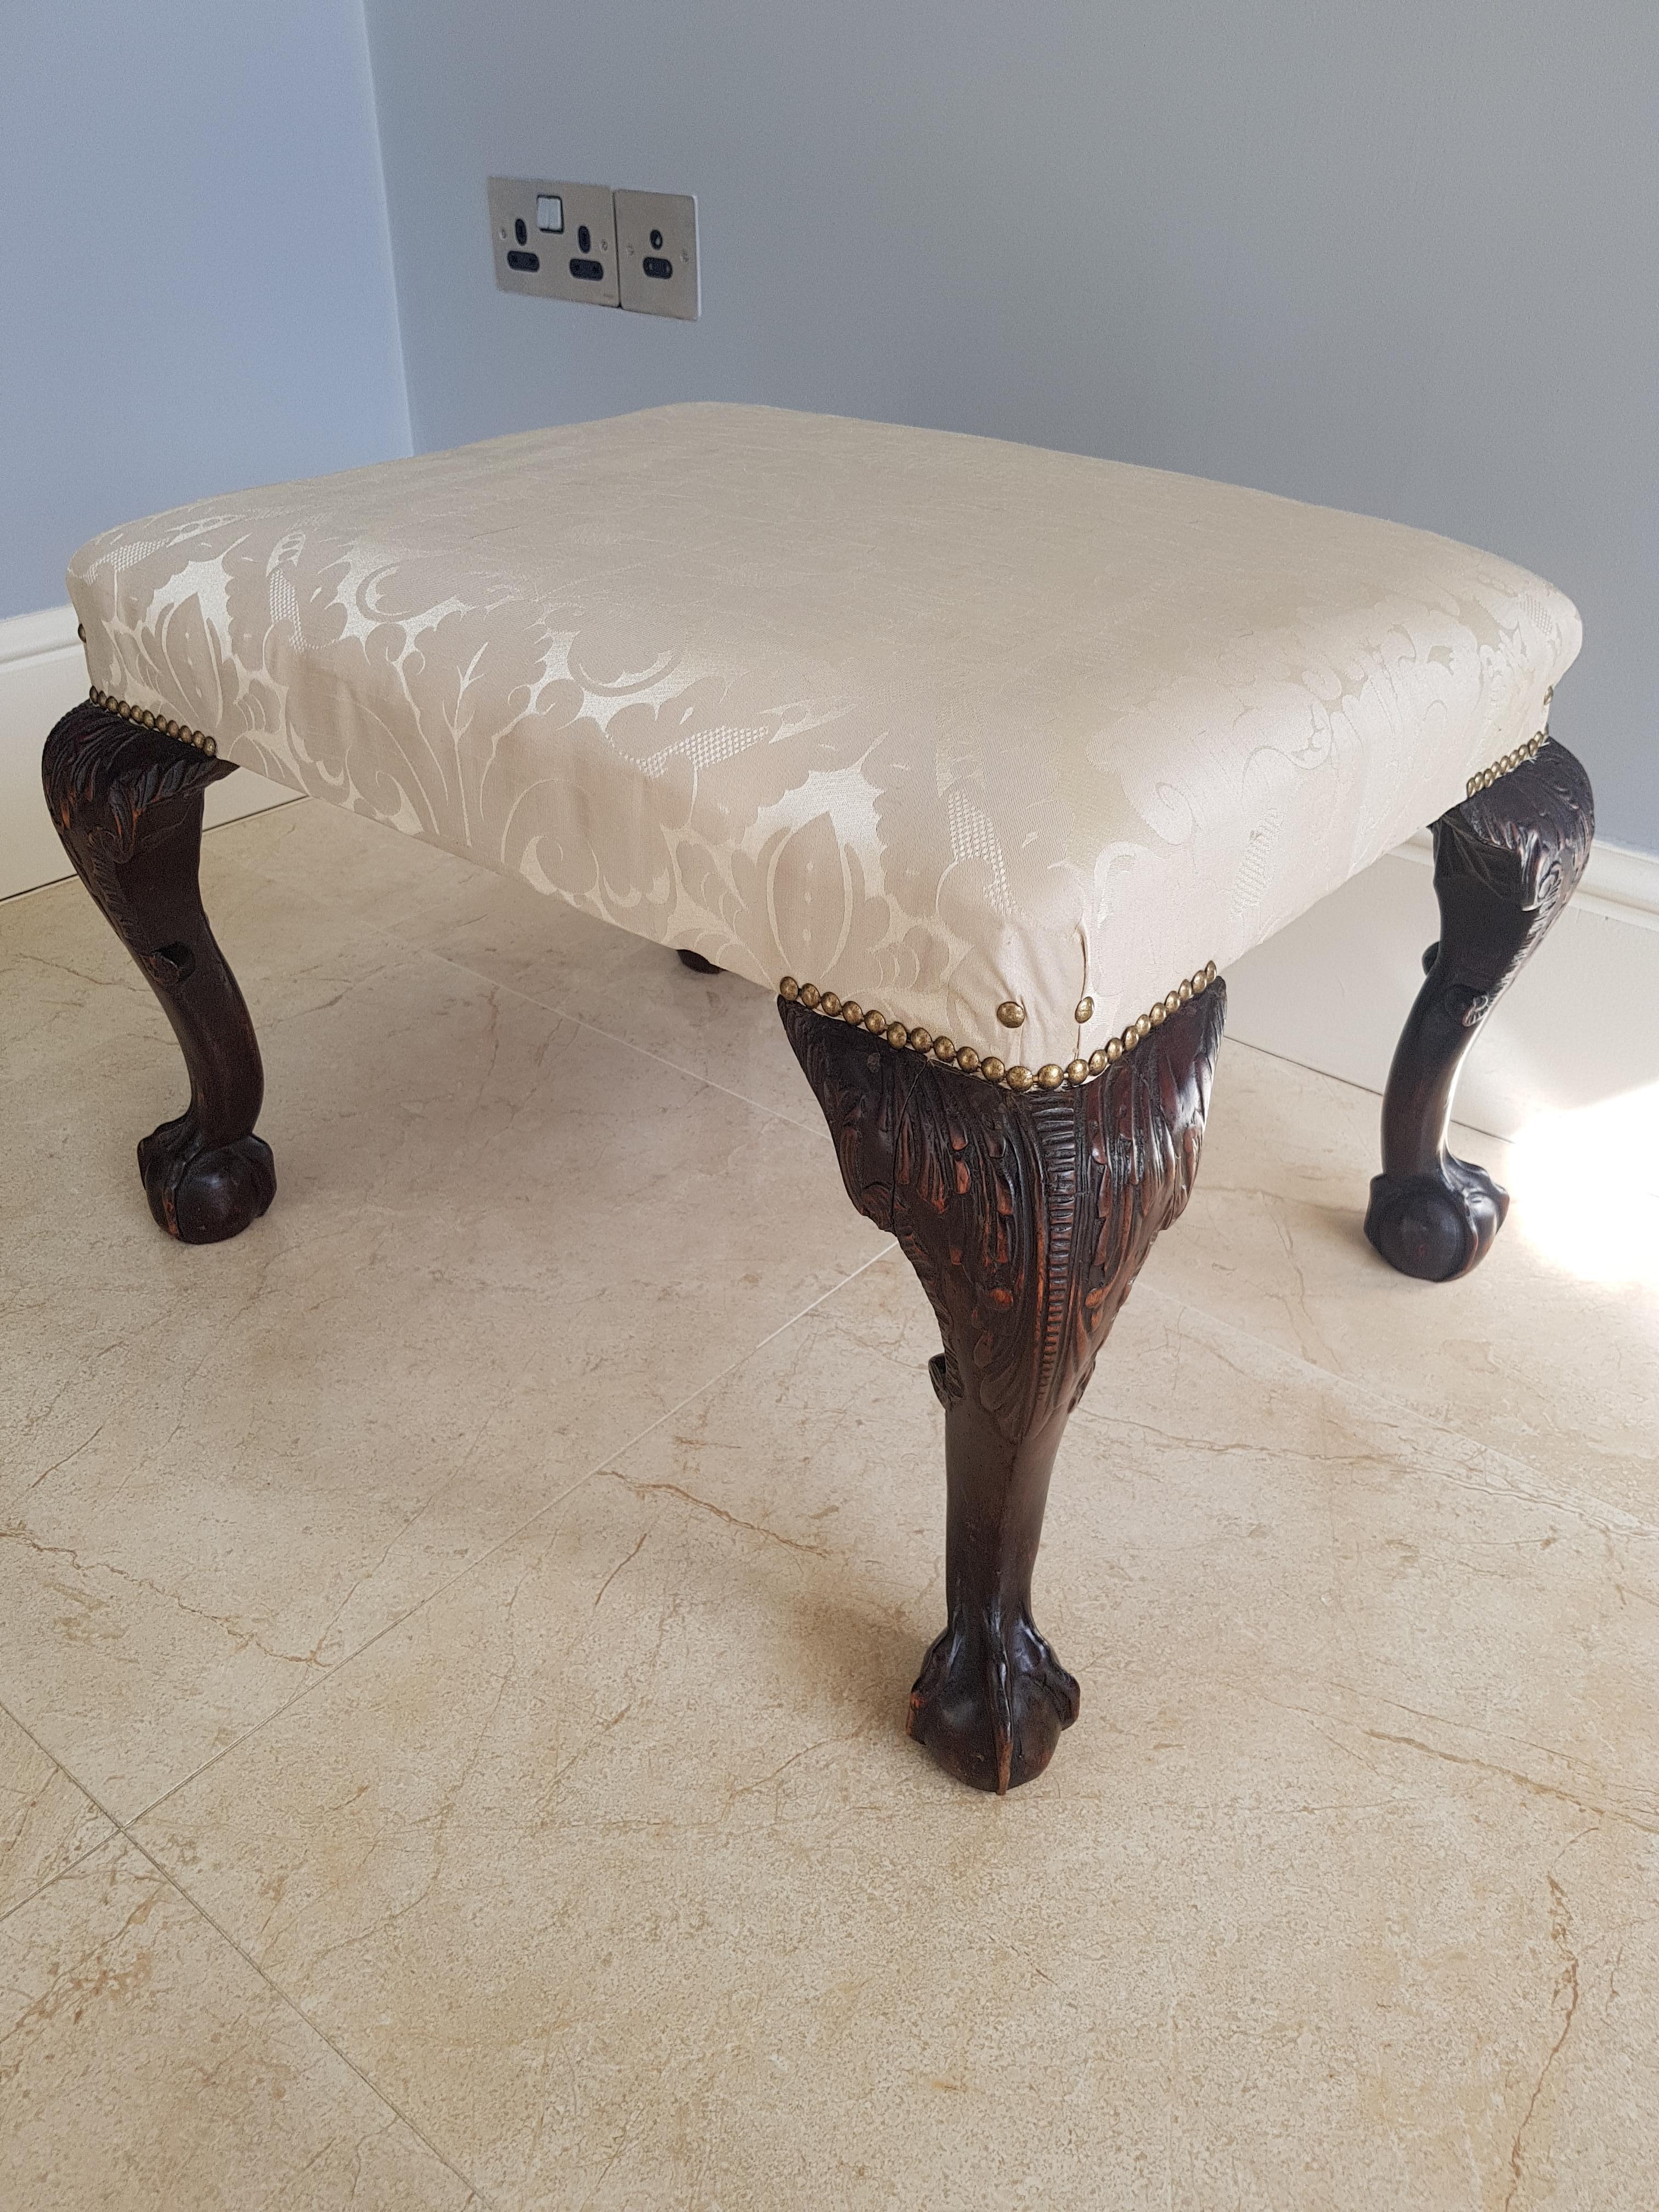 A fine George 111 style walnut stool with damask pattern upholstery, circa 1890.